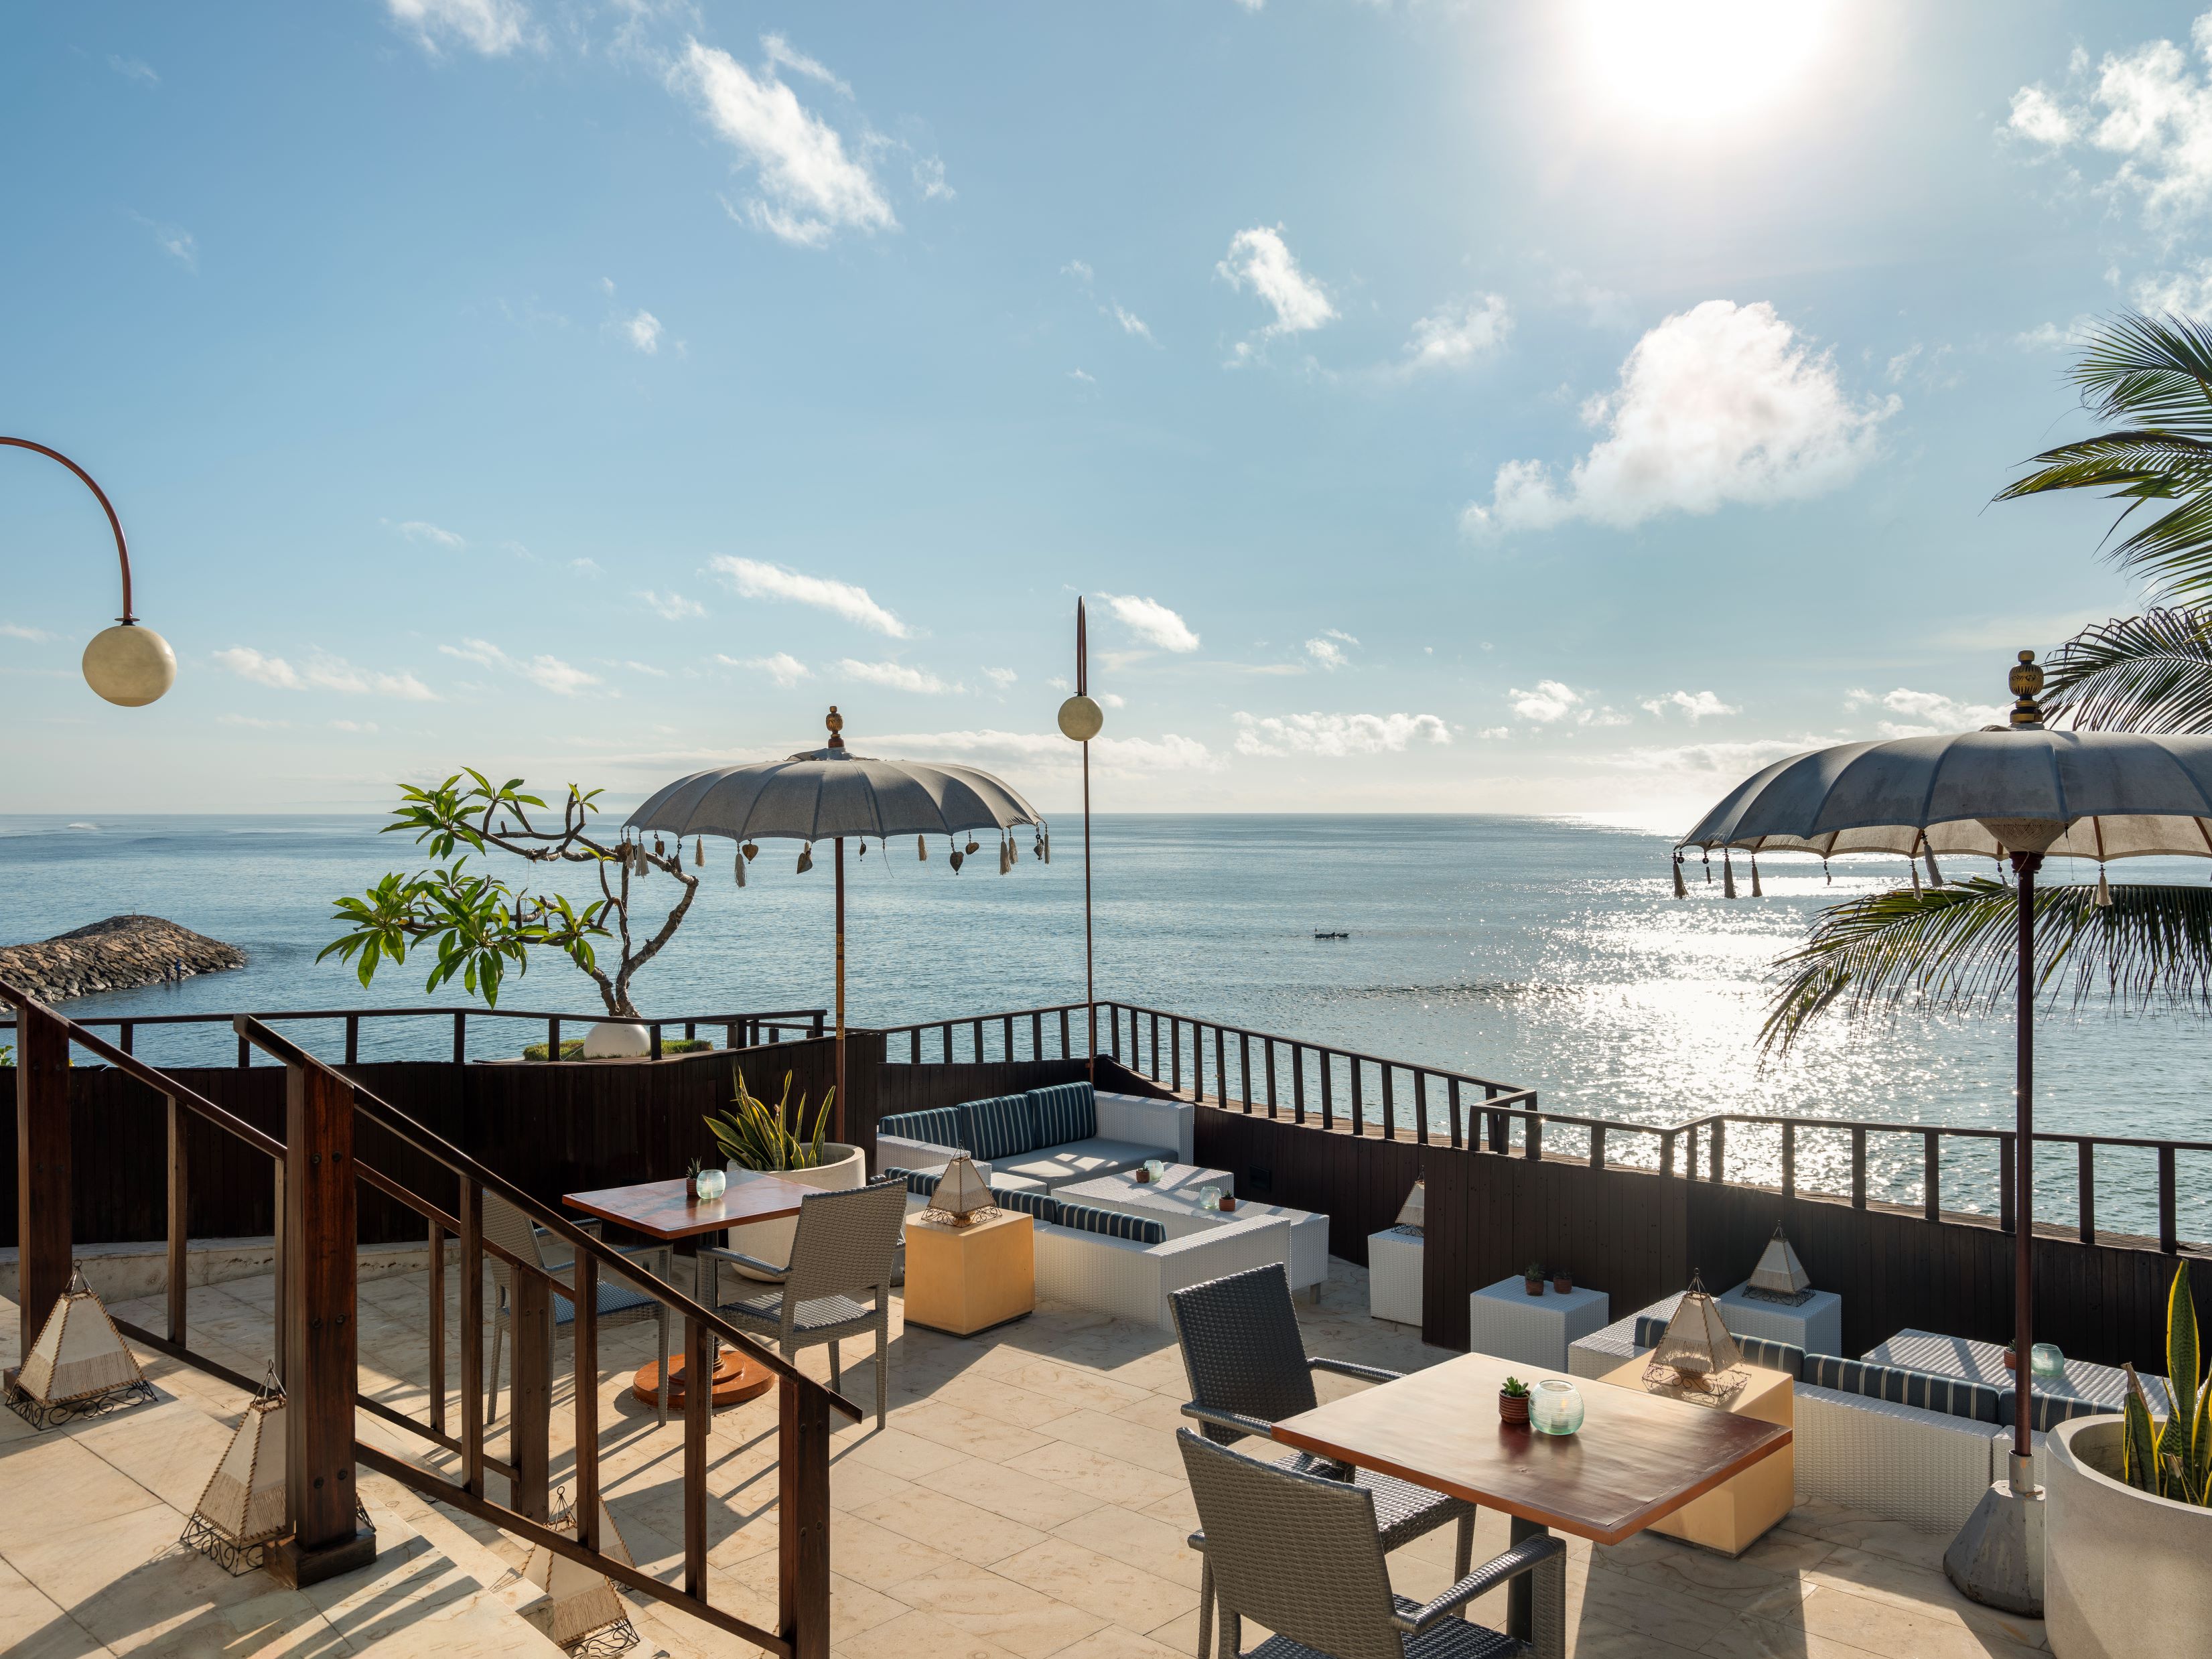 hilton bali resort, The general manager of Hilton Bali Resort shares his passion for the hospitality industry